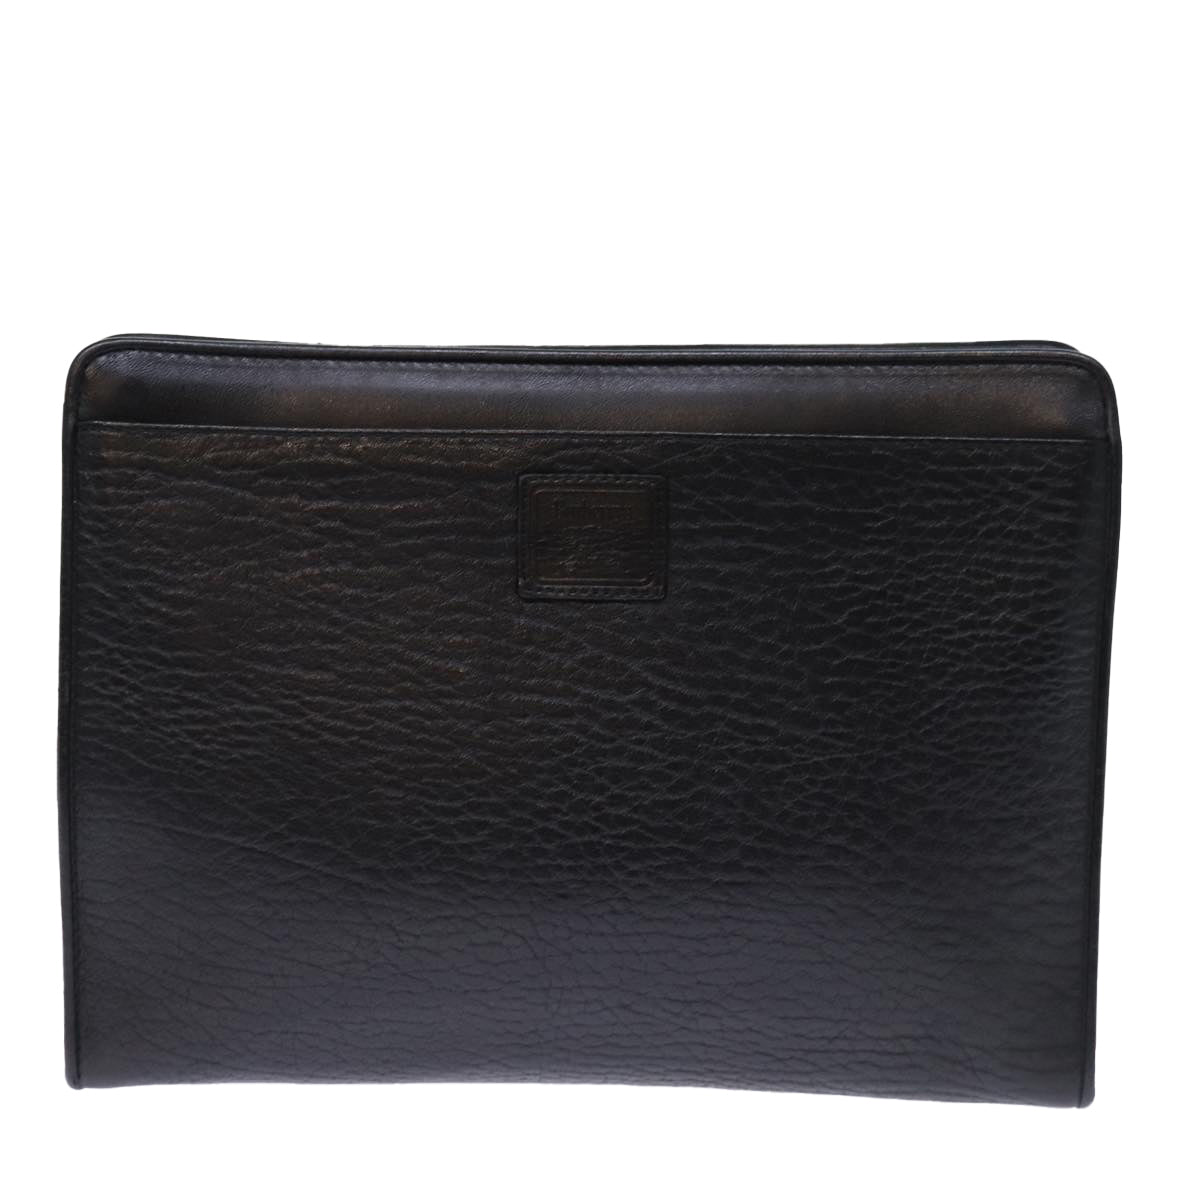 Burberrys Clutch Bag Leather Black Auth bs14320